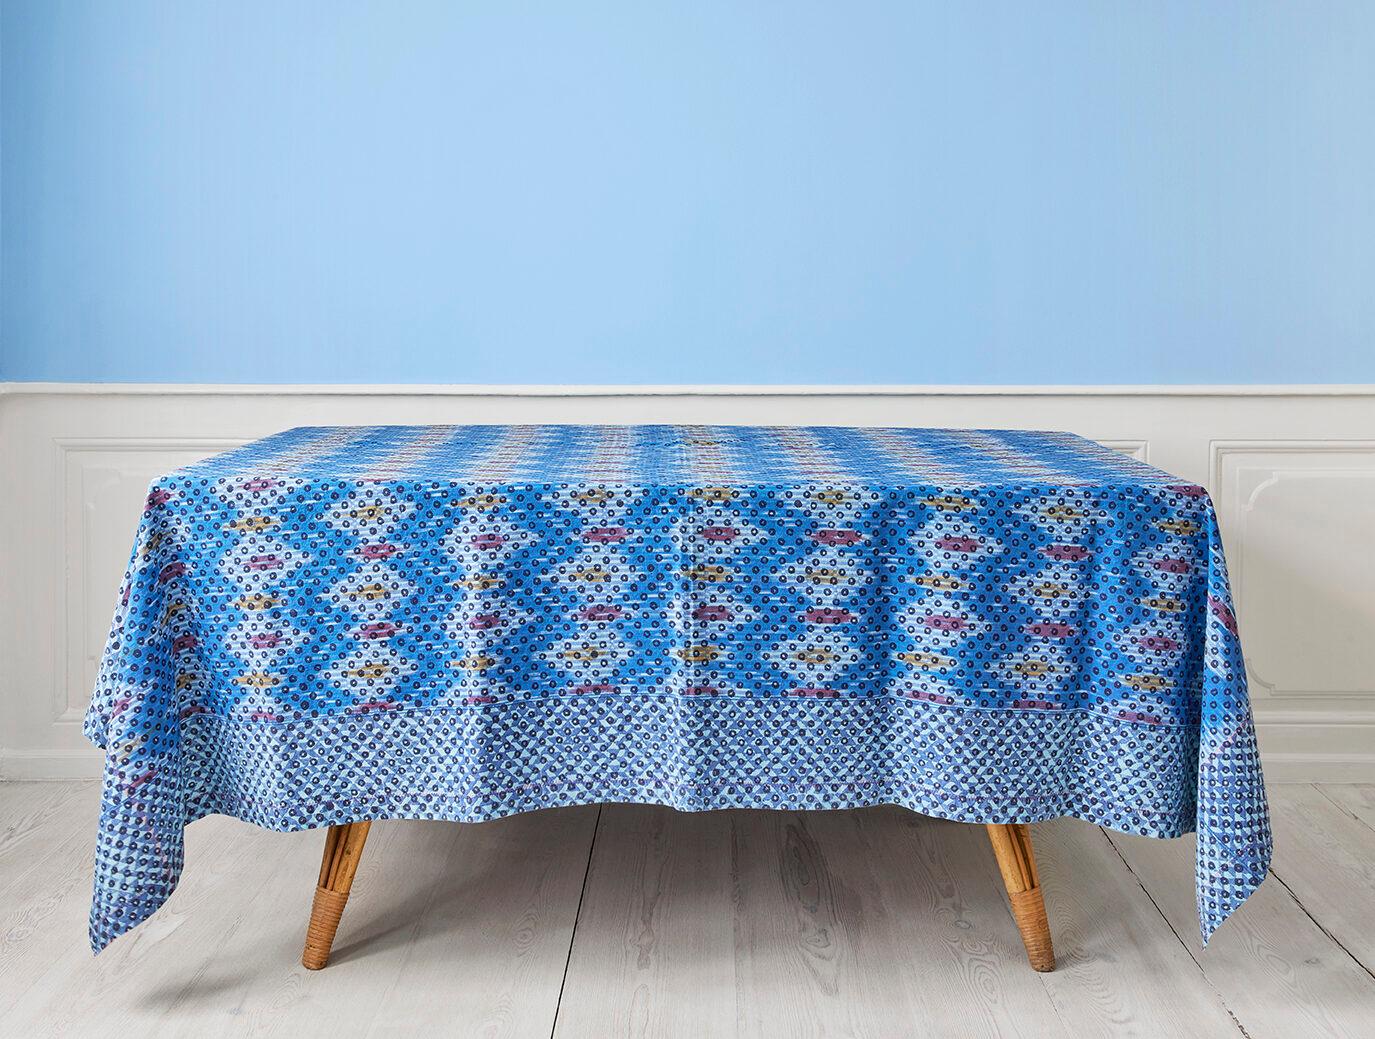 Gregory Parkinson
USA, Contemporary

One of a kind tablecloth with ikat hand-blocked patterns on textile. 

Measures: H 240 x W 203 cm.